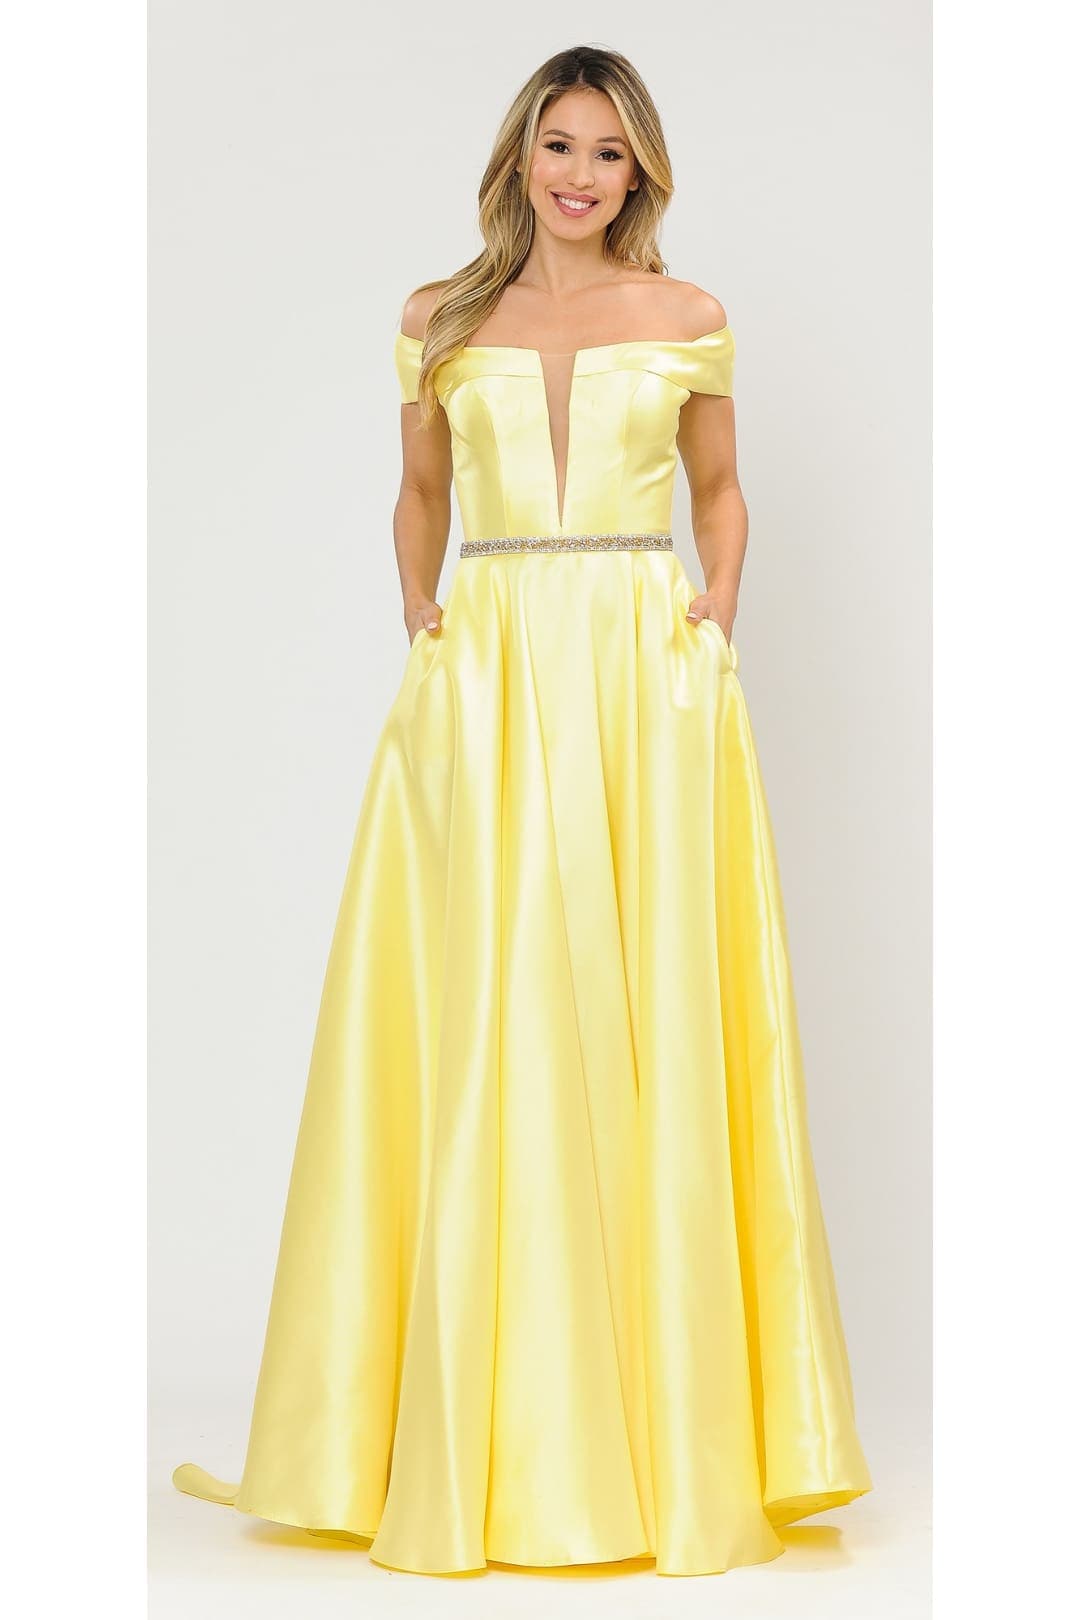 Classy Prom Off The Shoulder Dresses - YELLOW / XS